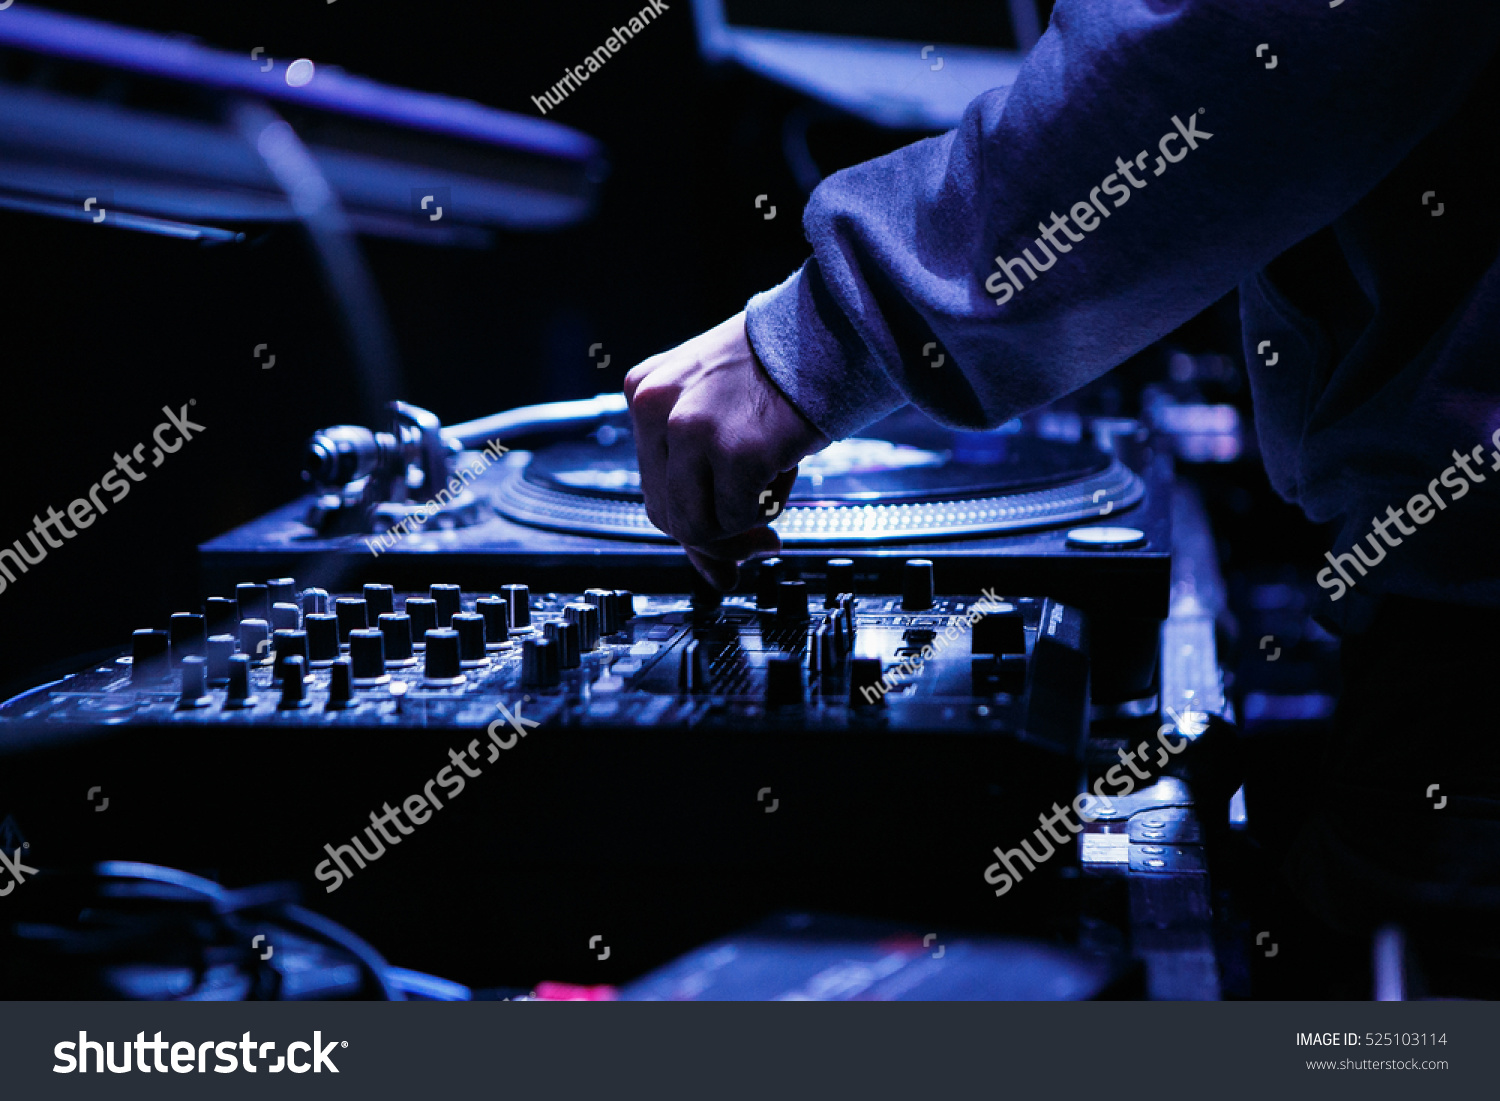 MOSCOW - 15 NOVEMBER,2016: Dj play music at hip hop party in club.Turntable vinyl record player,analog sound technology for disc jockey to scratch vinyl records,mix tracks #525103114